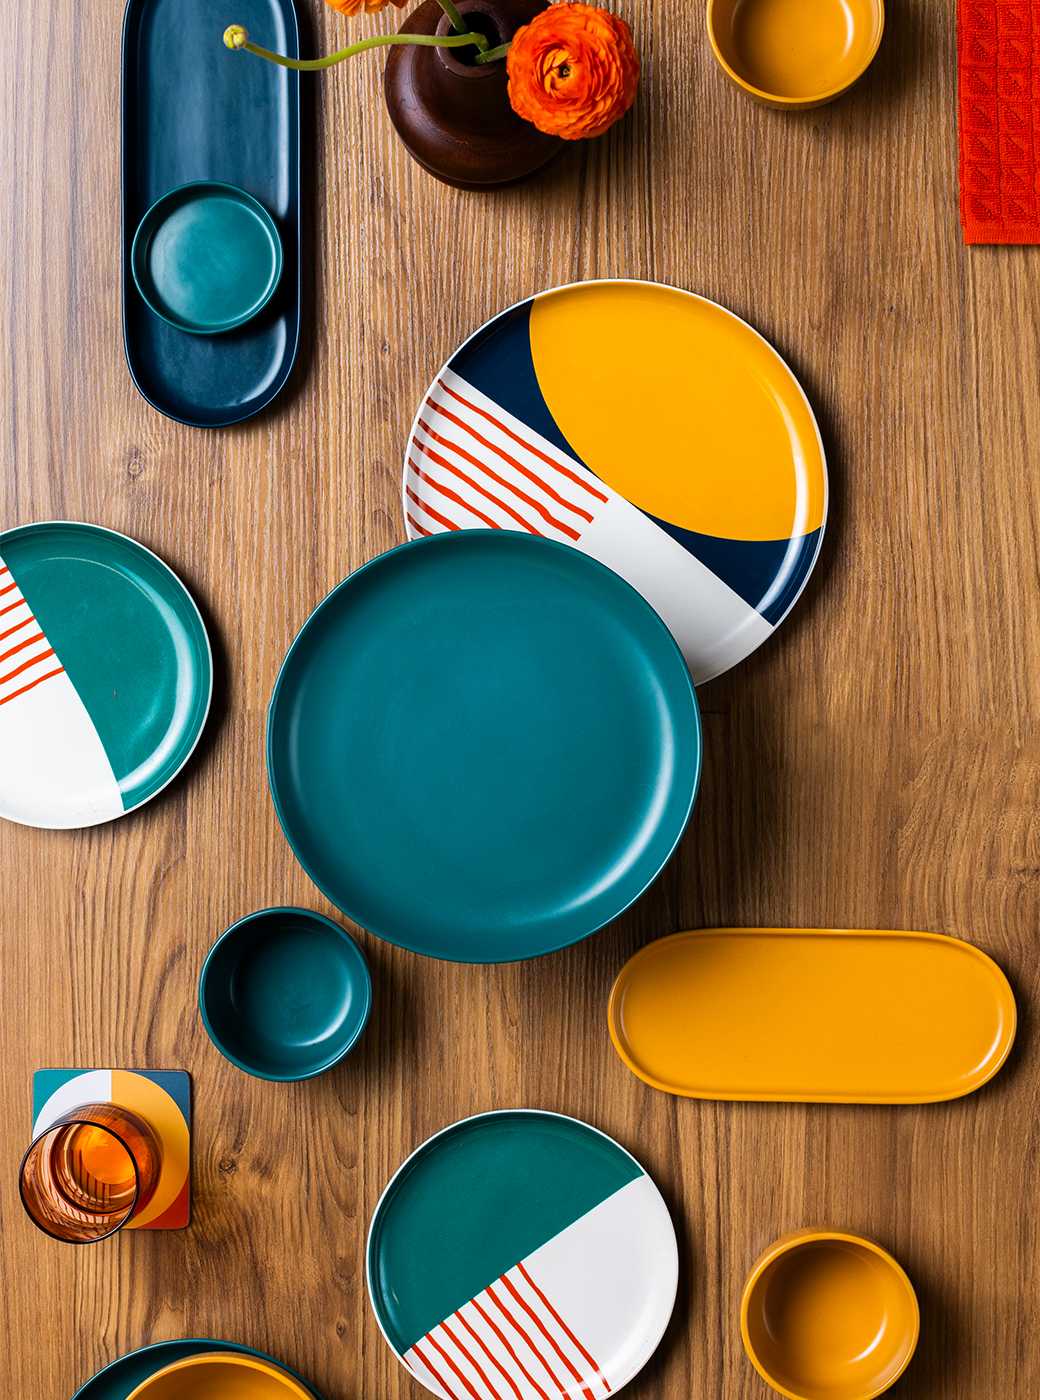 Wooden dining room table with colorful tableware.